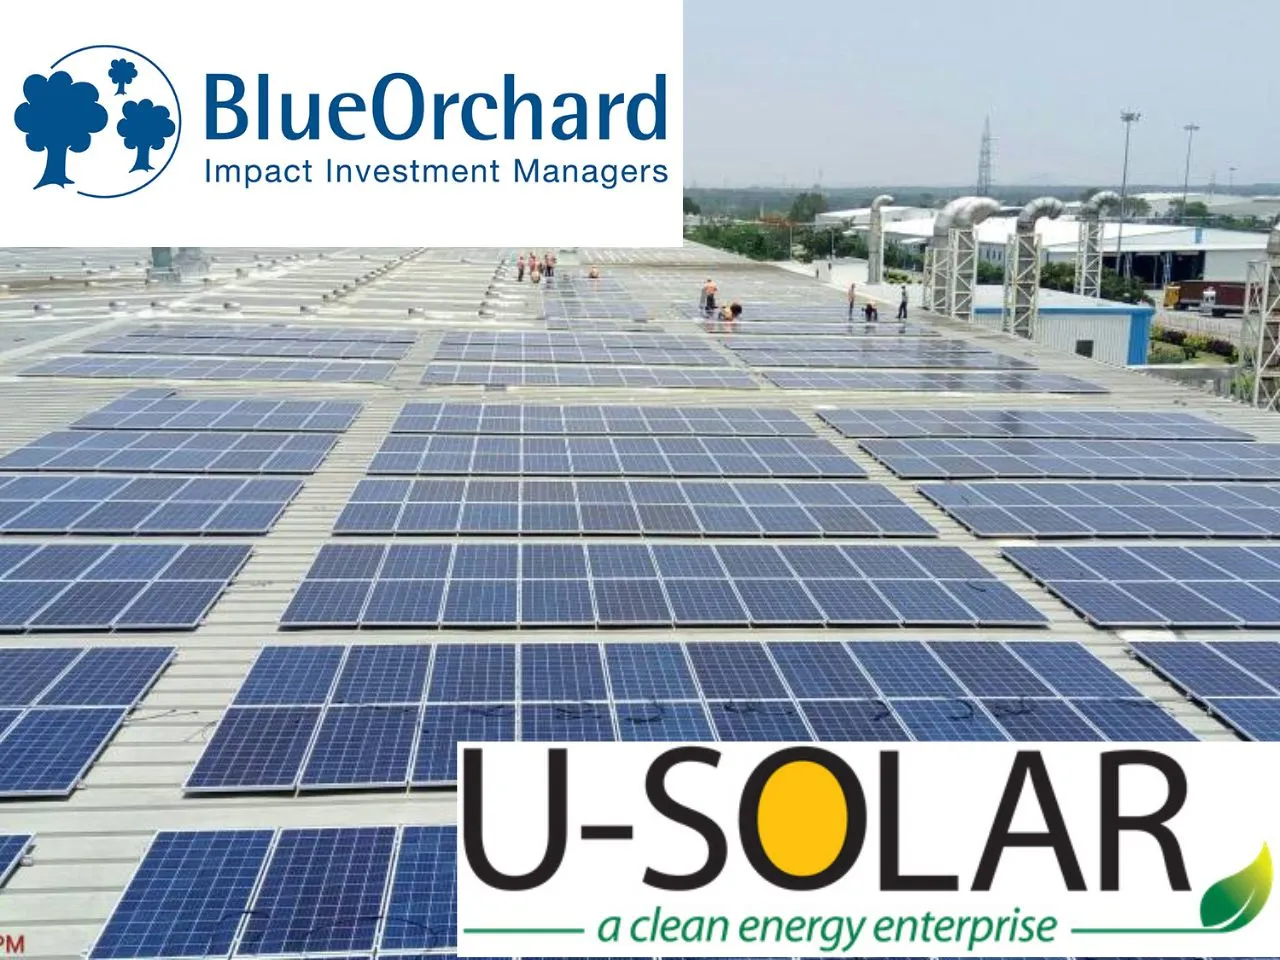 BlueOrchard Invests In U-Solar To Expand C&I Rooftop Solar Portfolio